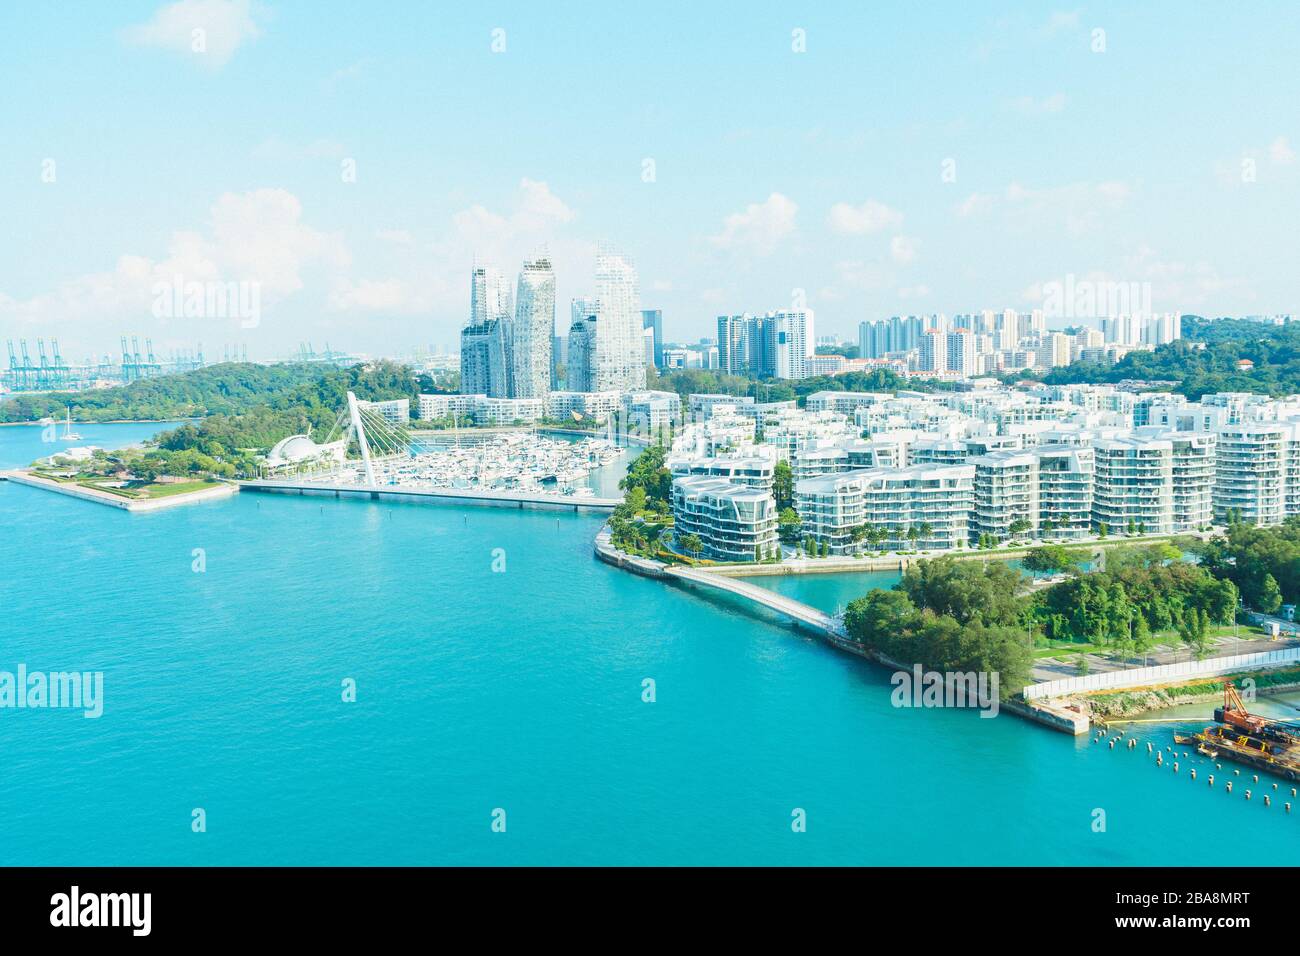 KEPPEL HARBOR / SINGAPORE, 29 APRIL 2018 - Reflections at Keppel Bay in Singapore is a 99-year leasehold luxury waterfront residential complex on appr Stock Photo